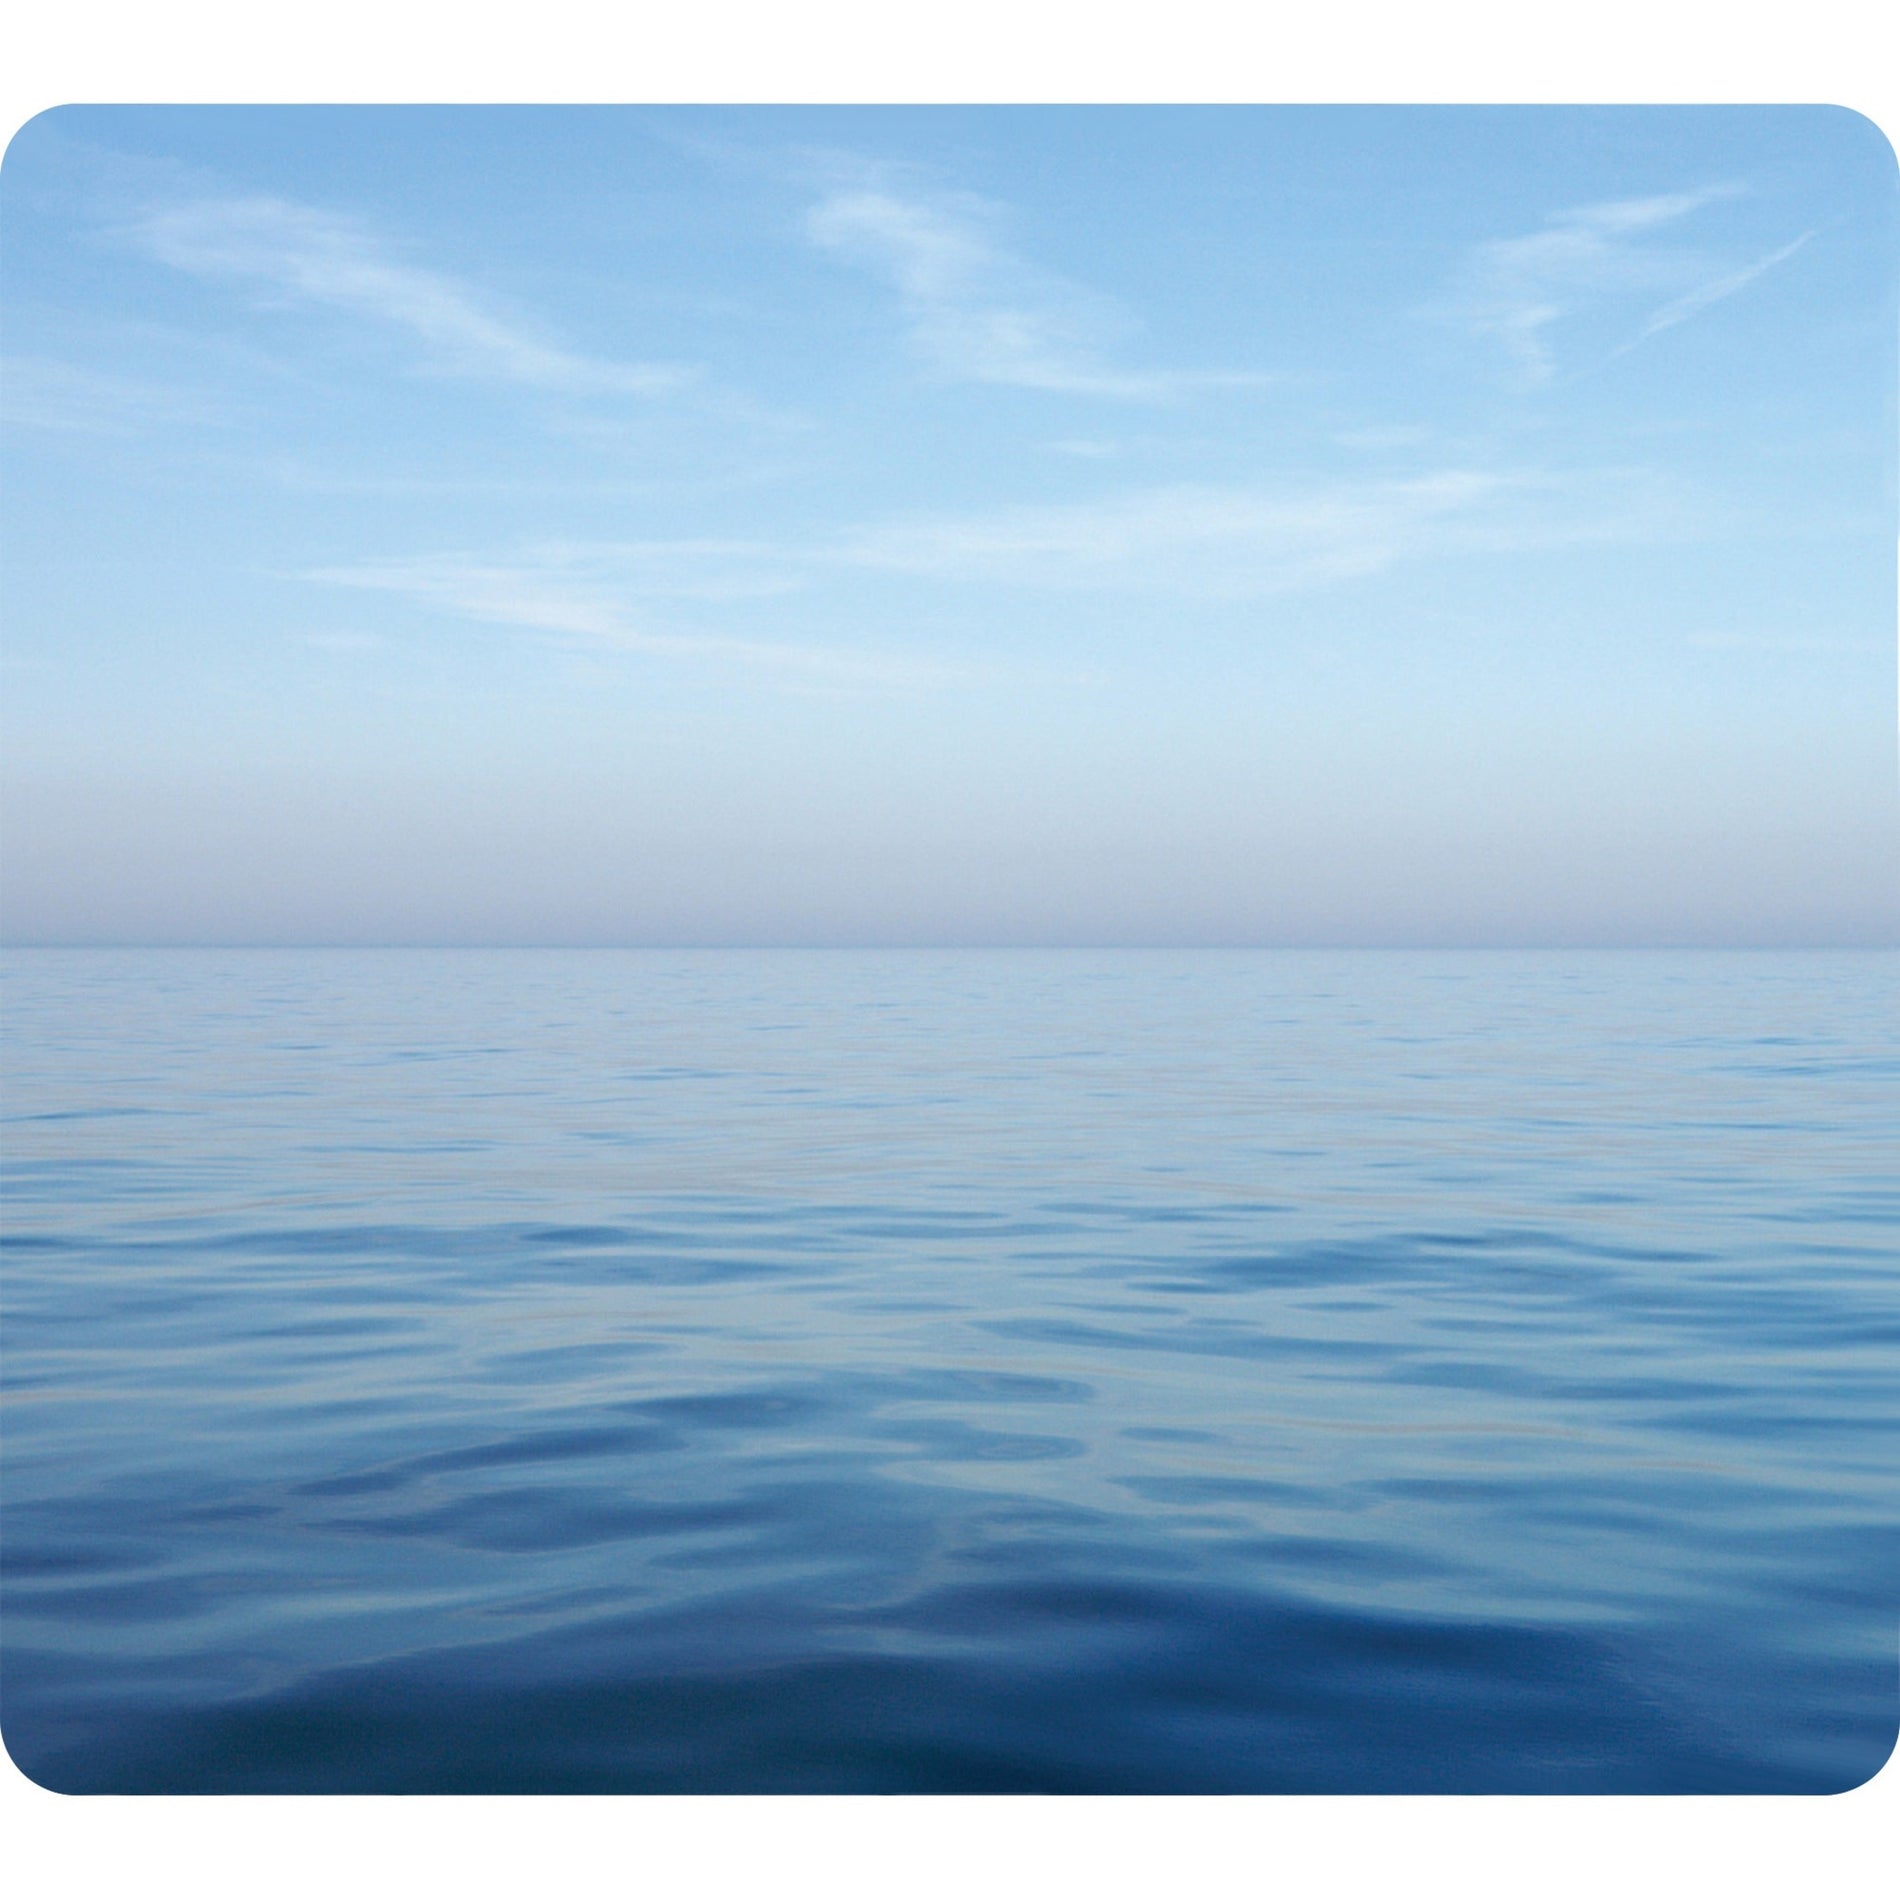 Fellowes 5903901 Recycled Mouse Pad - Blue Ocean, Nonslip Back, 9"x8"x1/16"